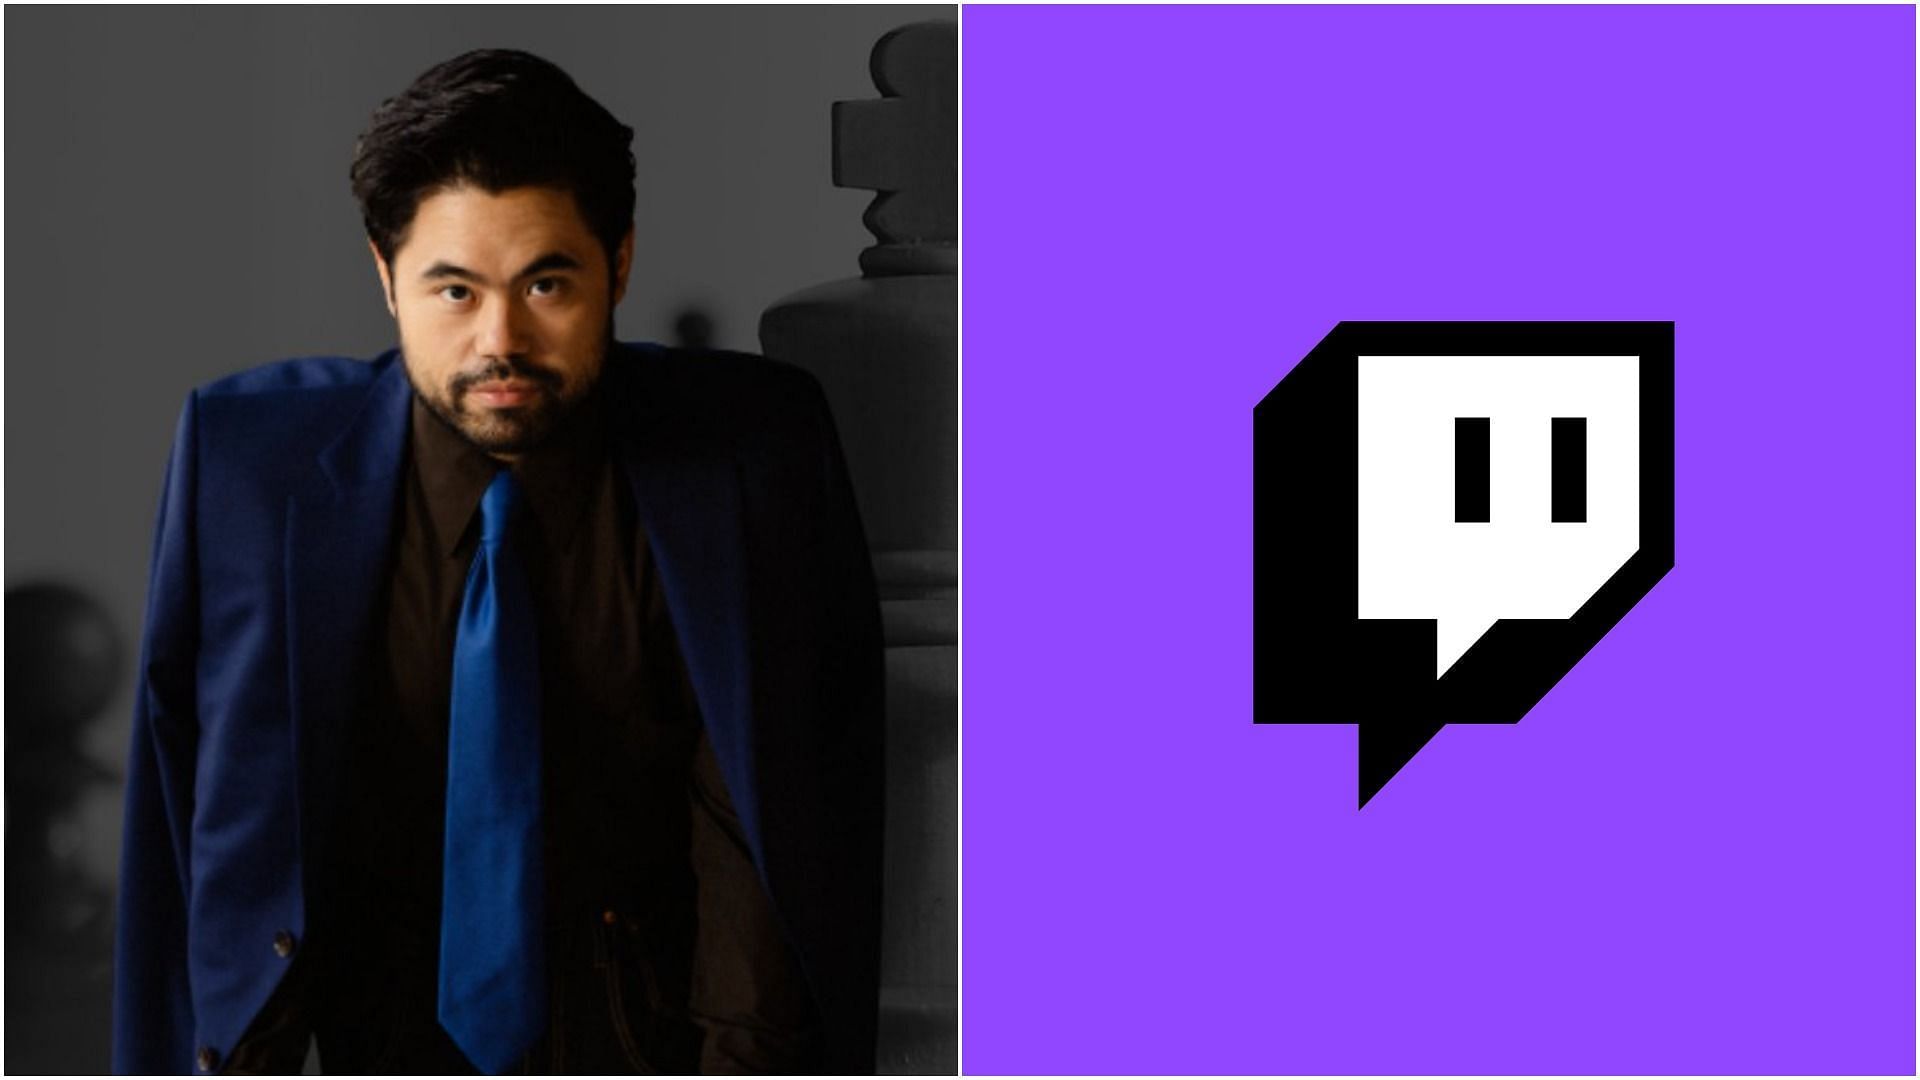 GMHikaru banned on Twitch, says reason is for watching Dr